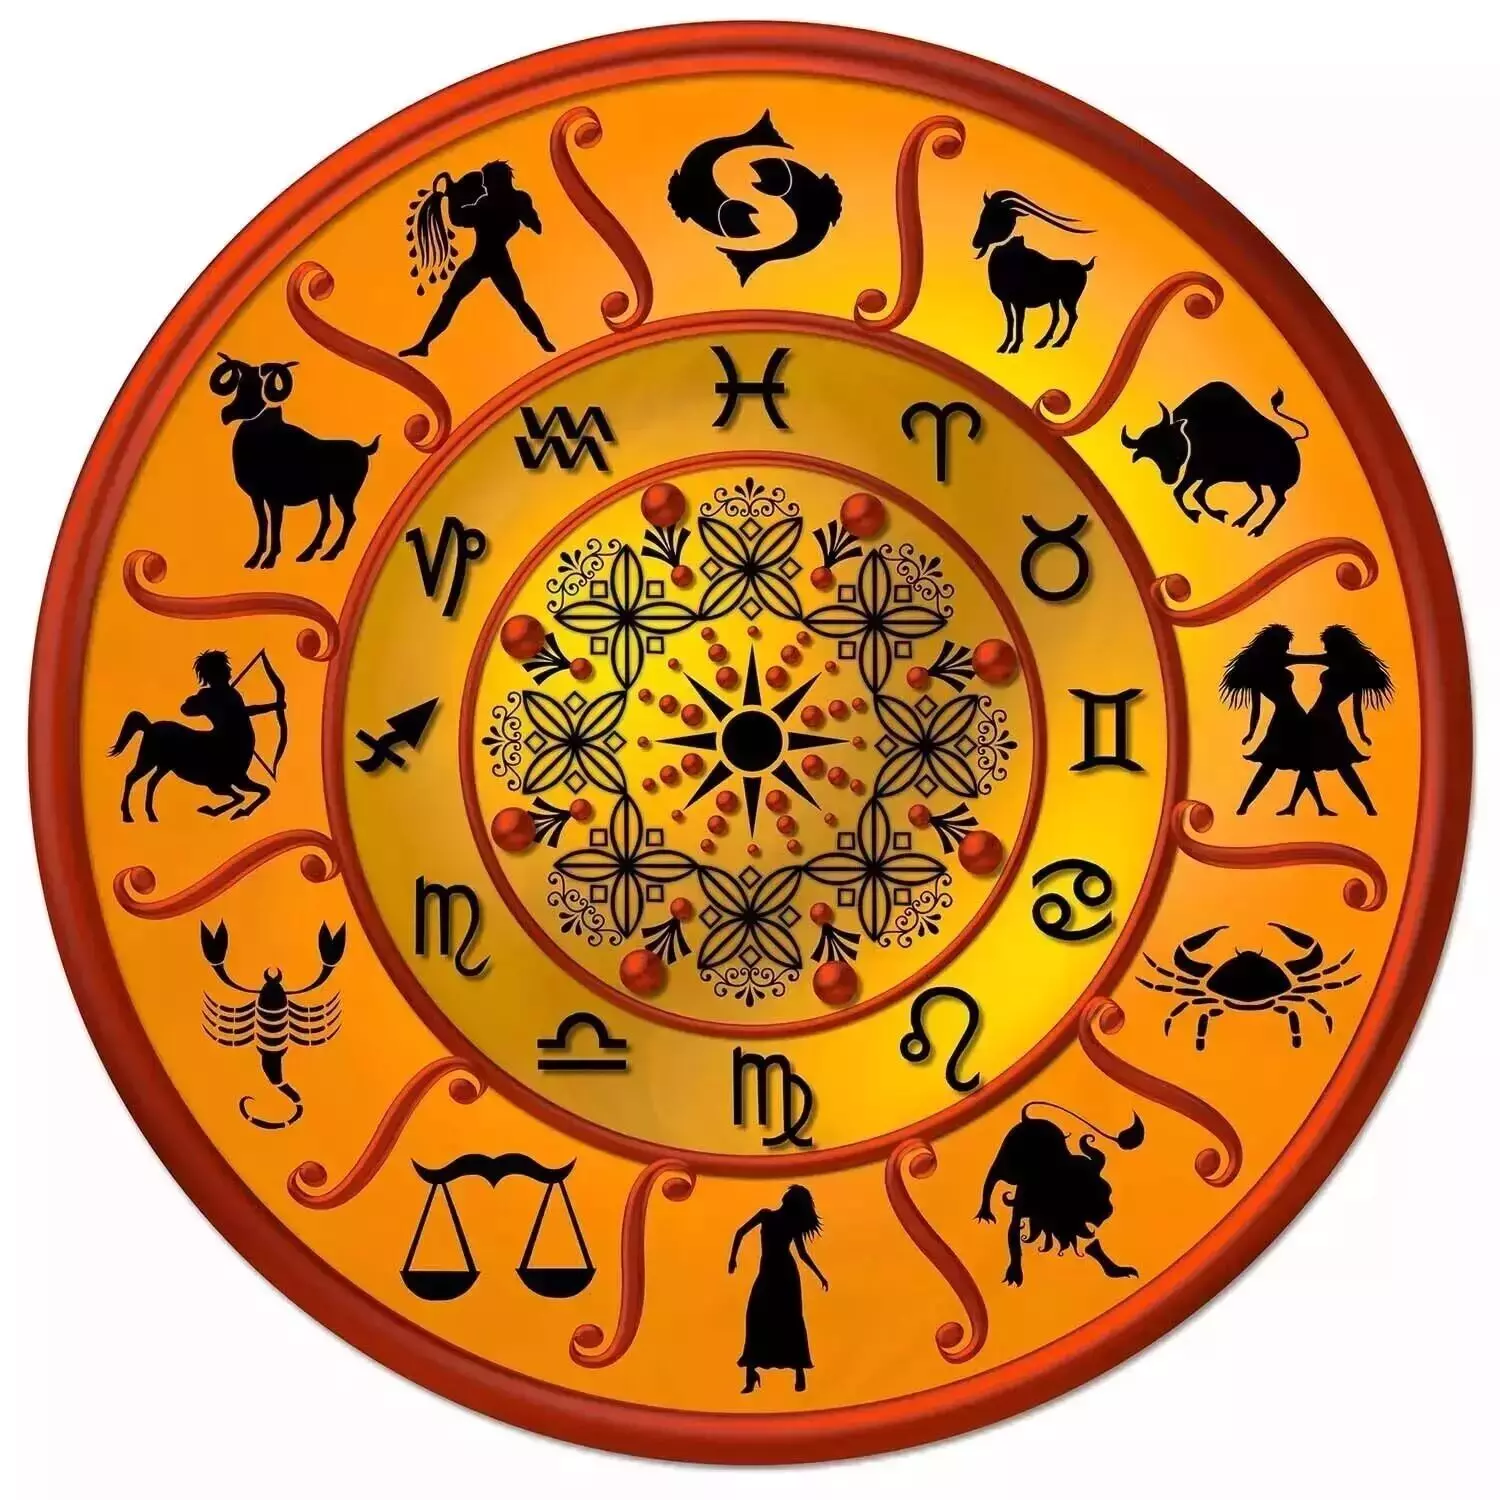 22 February  – Know your todays horoscope